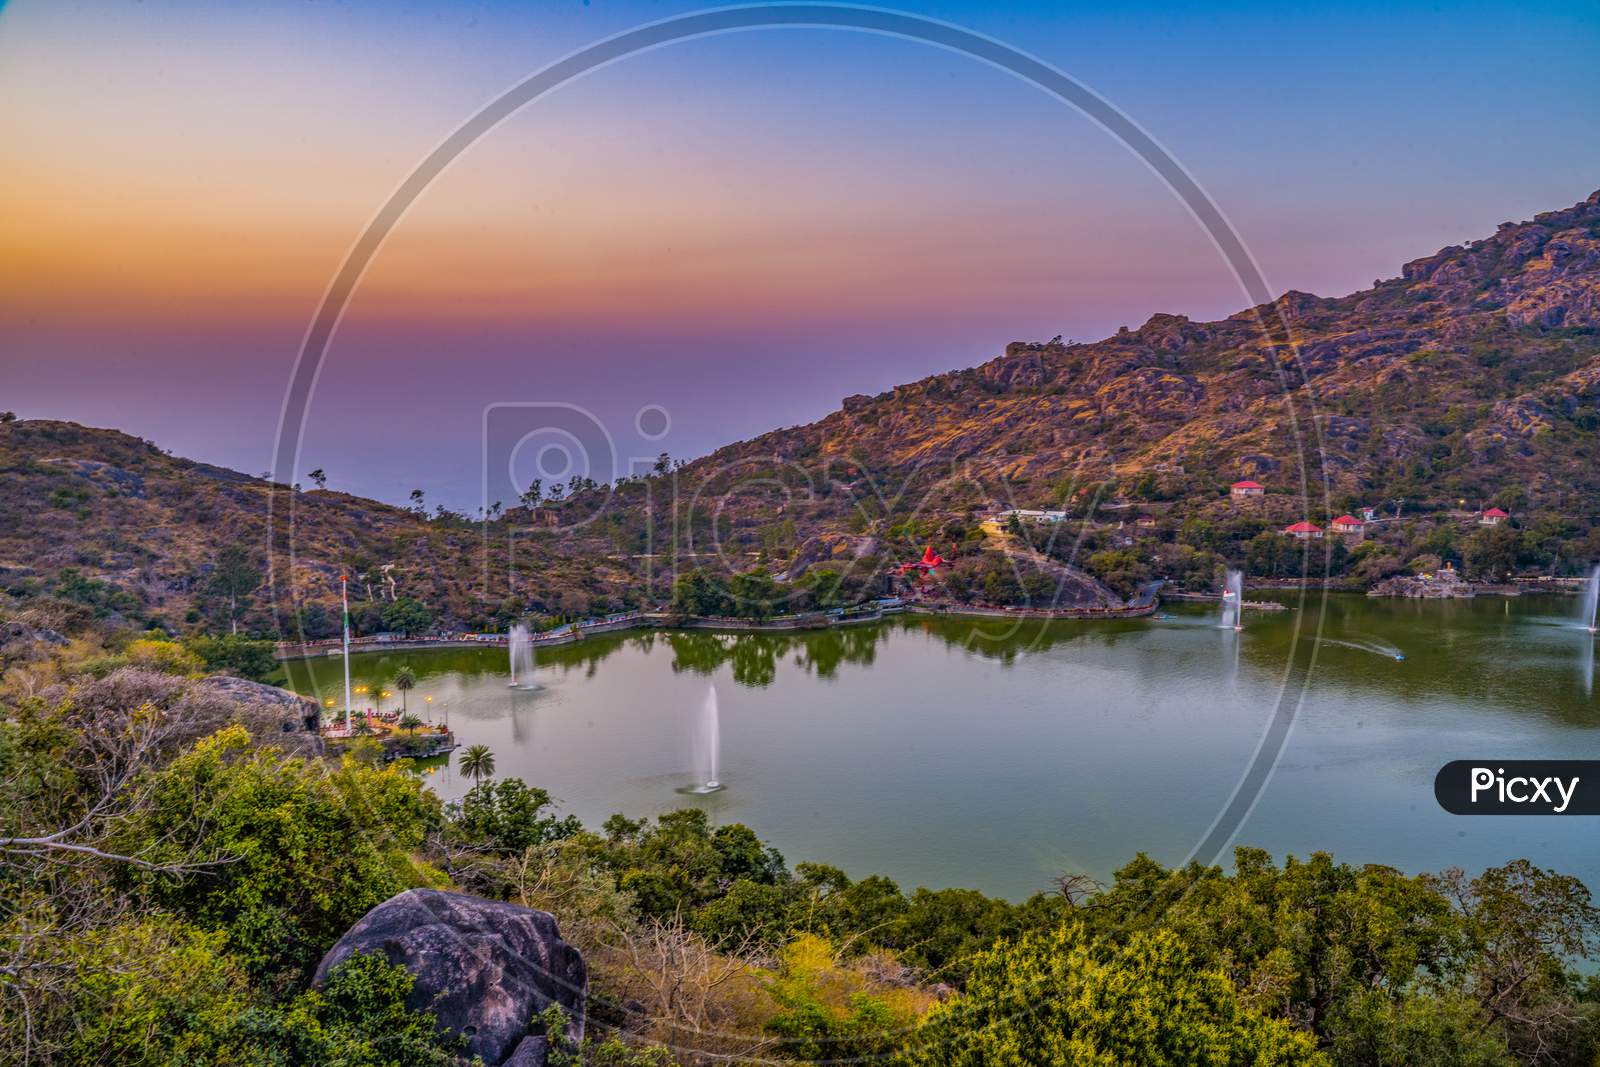 Nakki Lake is a lake situated in the Indian hill station of Mount Abu in Aravalli range.